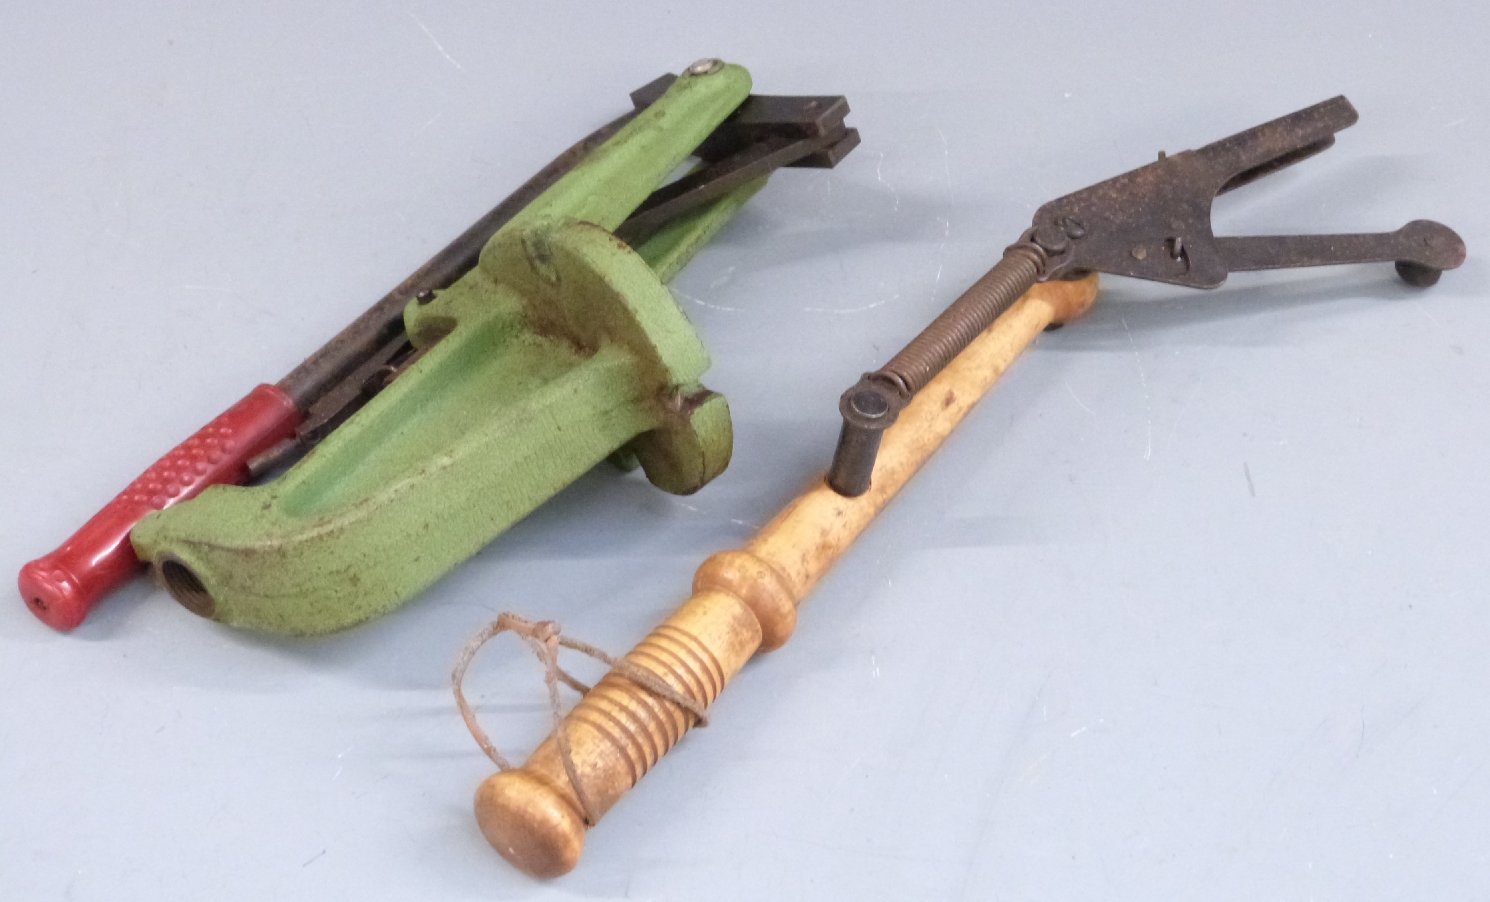 A handheld clay pigeon launcher together with a Redding shotgun cartridge re-loading tool.